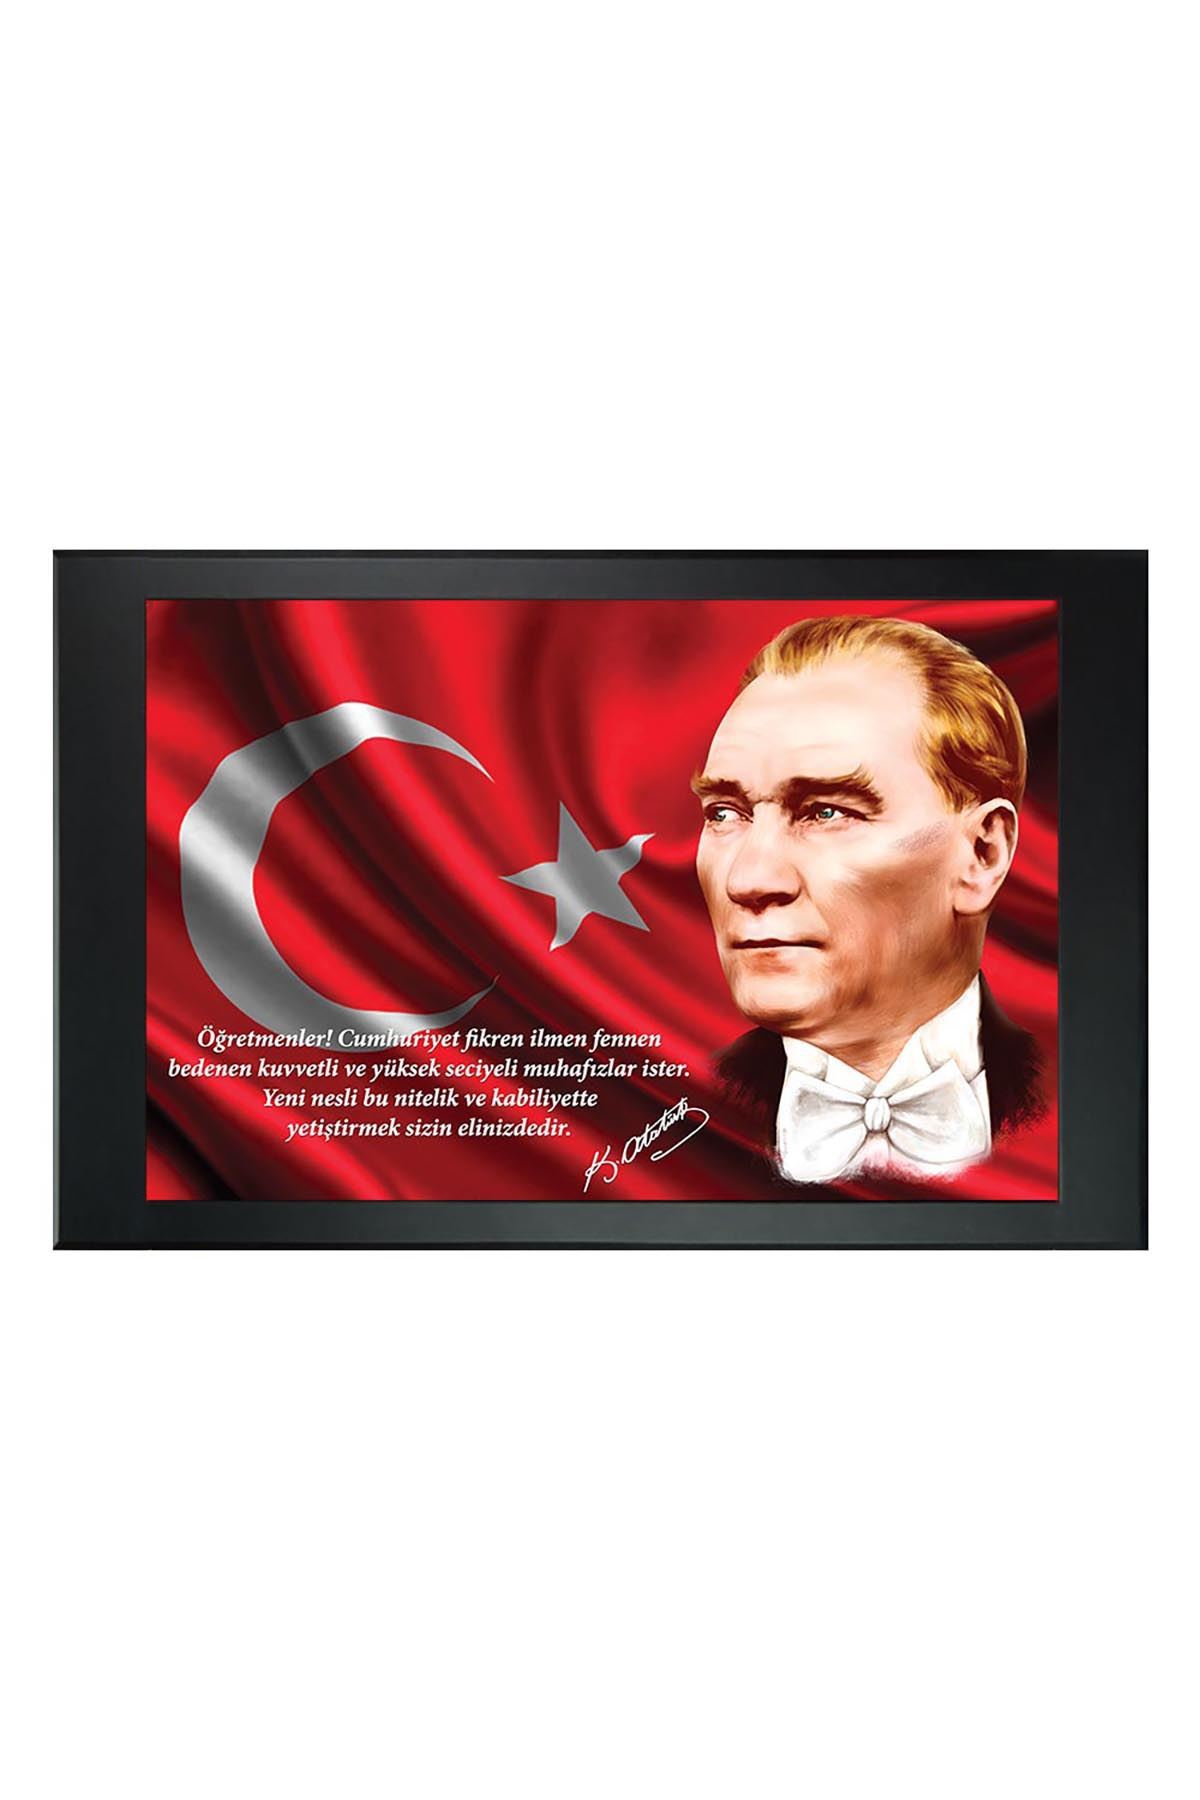 Atatürk Printed Manager Board | Printed Manager Board | Leather Framed Board | High Quality Manager Board 